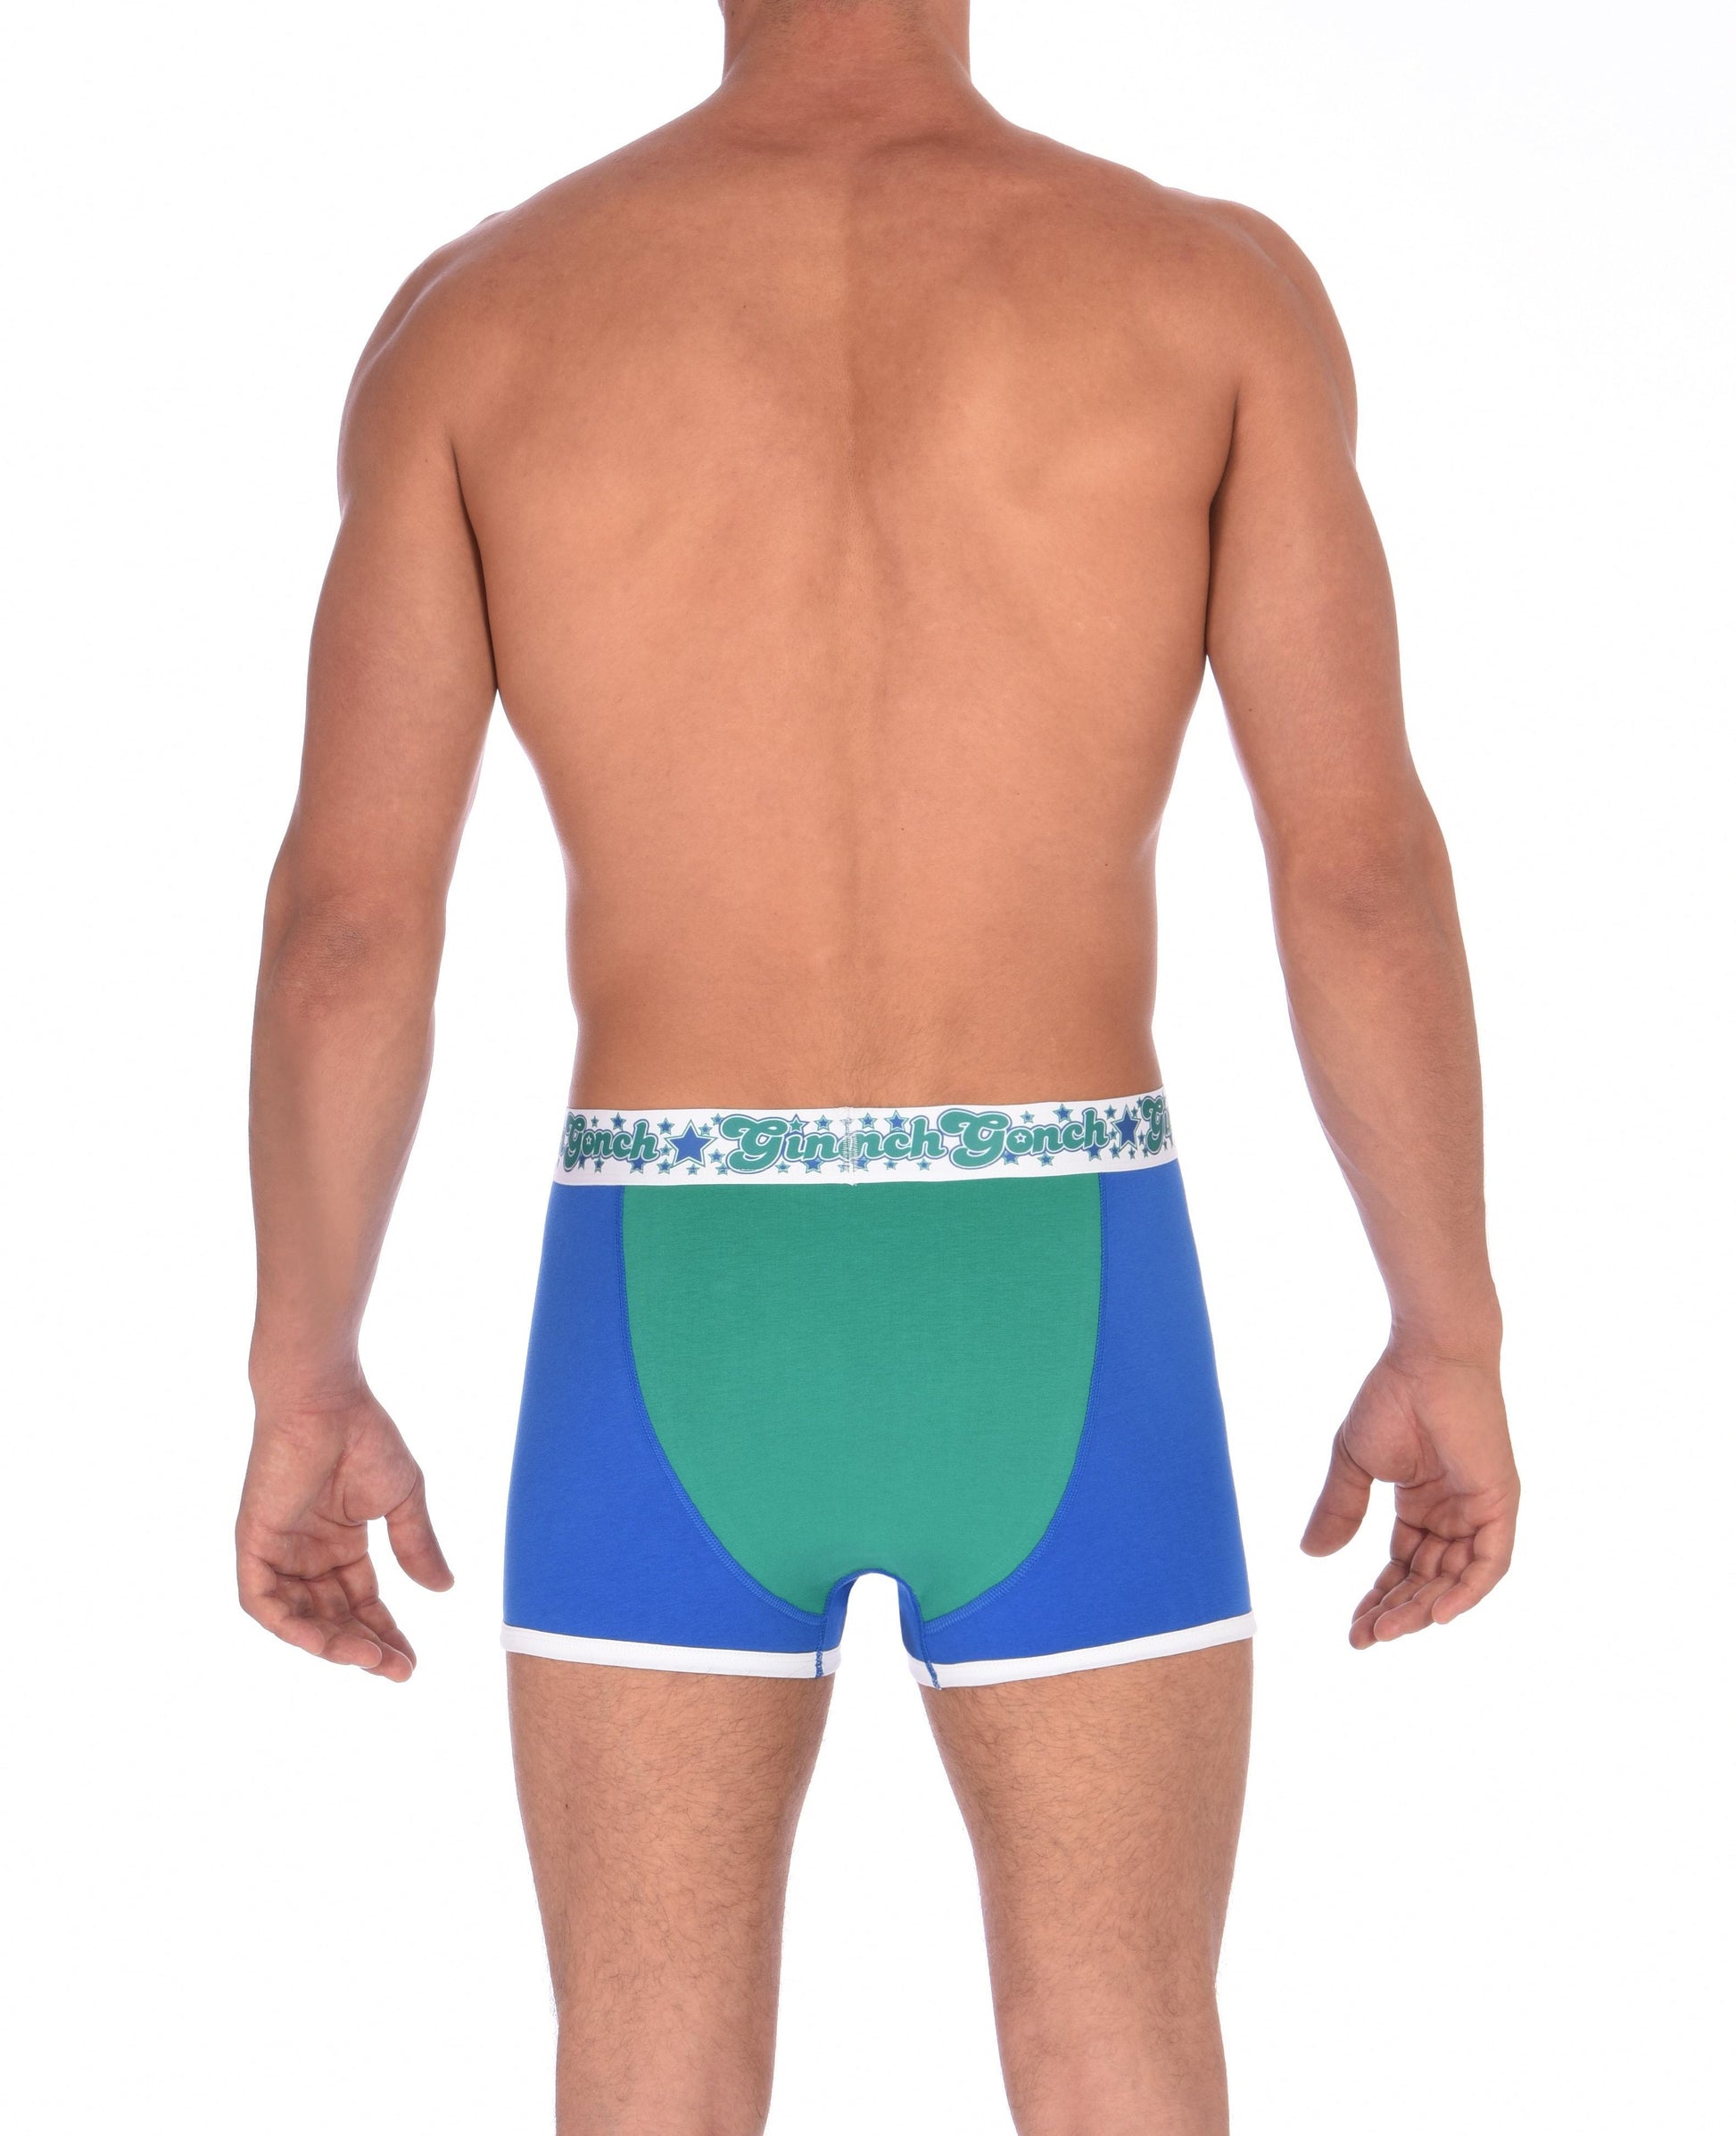 Ginch Gonch Blue Lagoon men's boxer briefs trunks y front blue and green. panels with white trim and printed waistband back